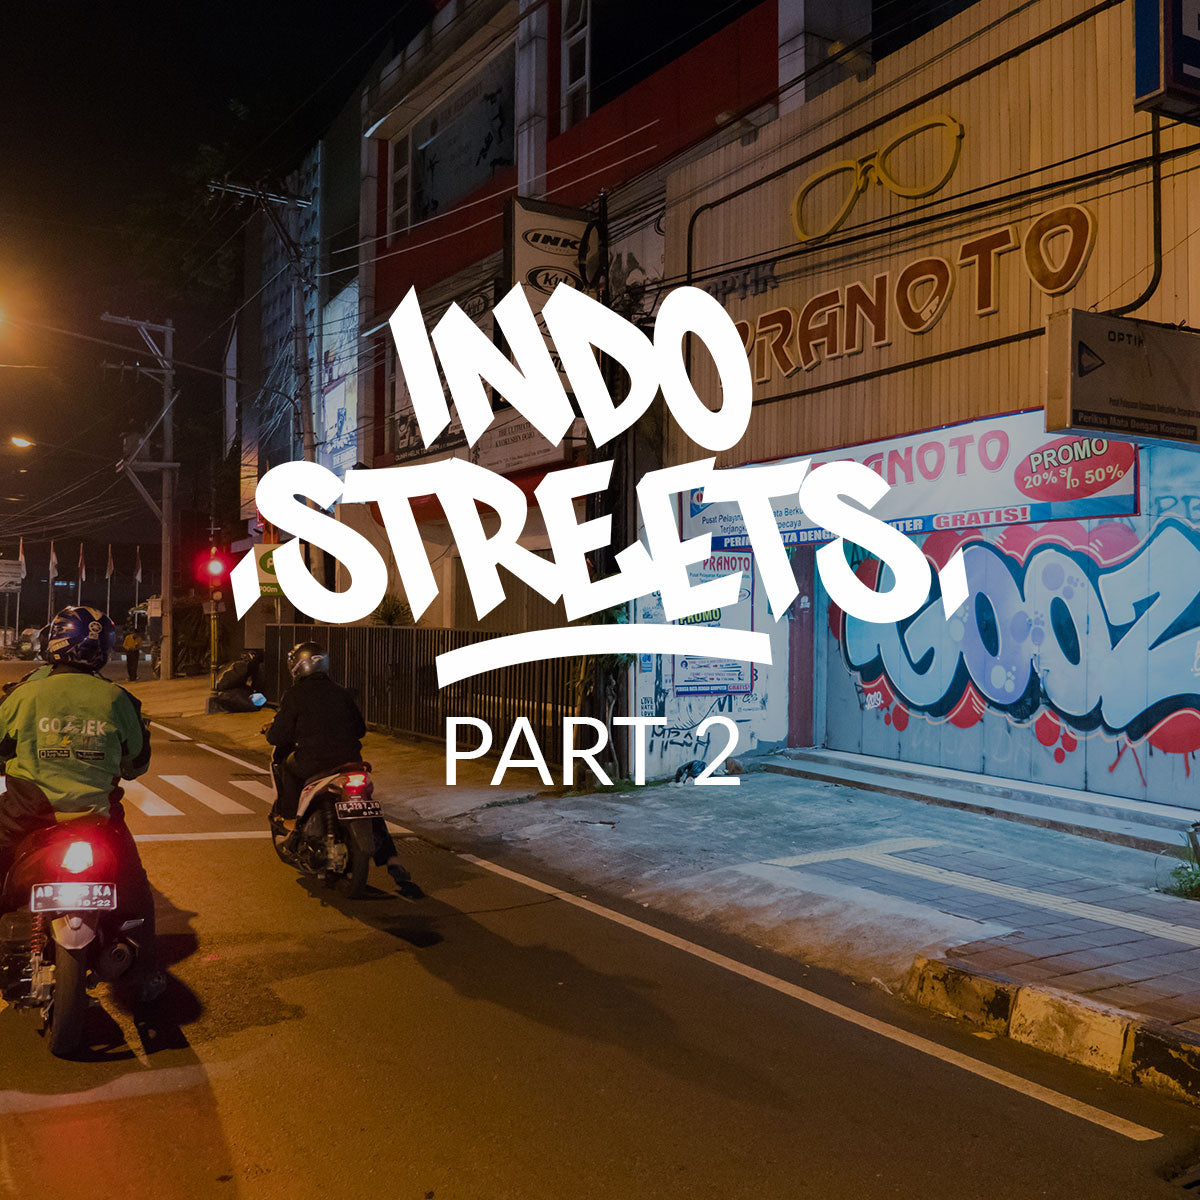 VIDEO - INDO STREETS 2